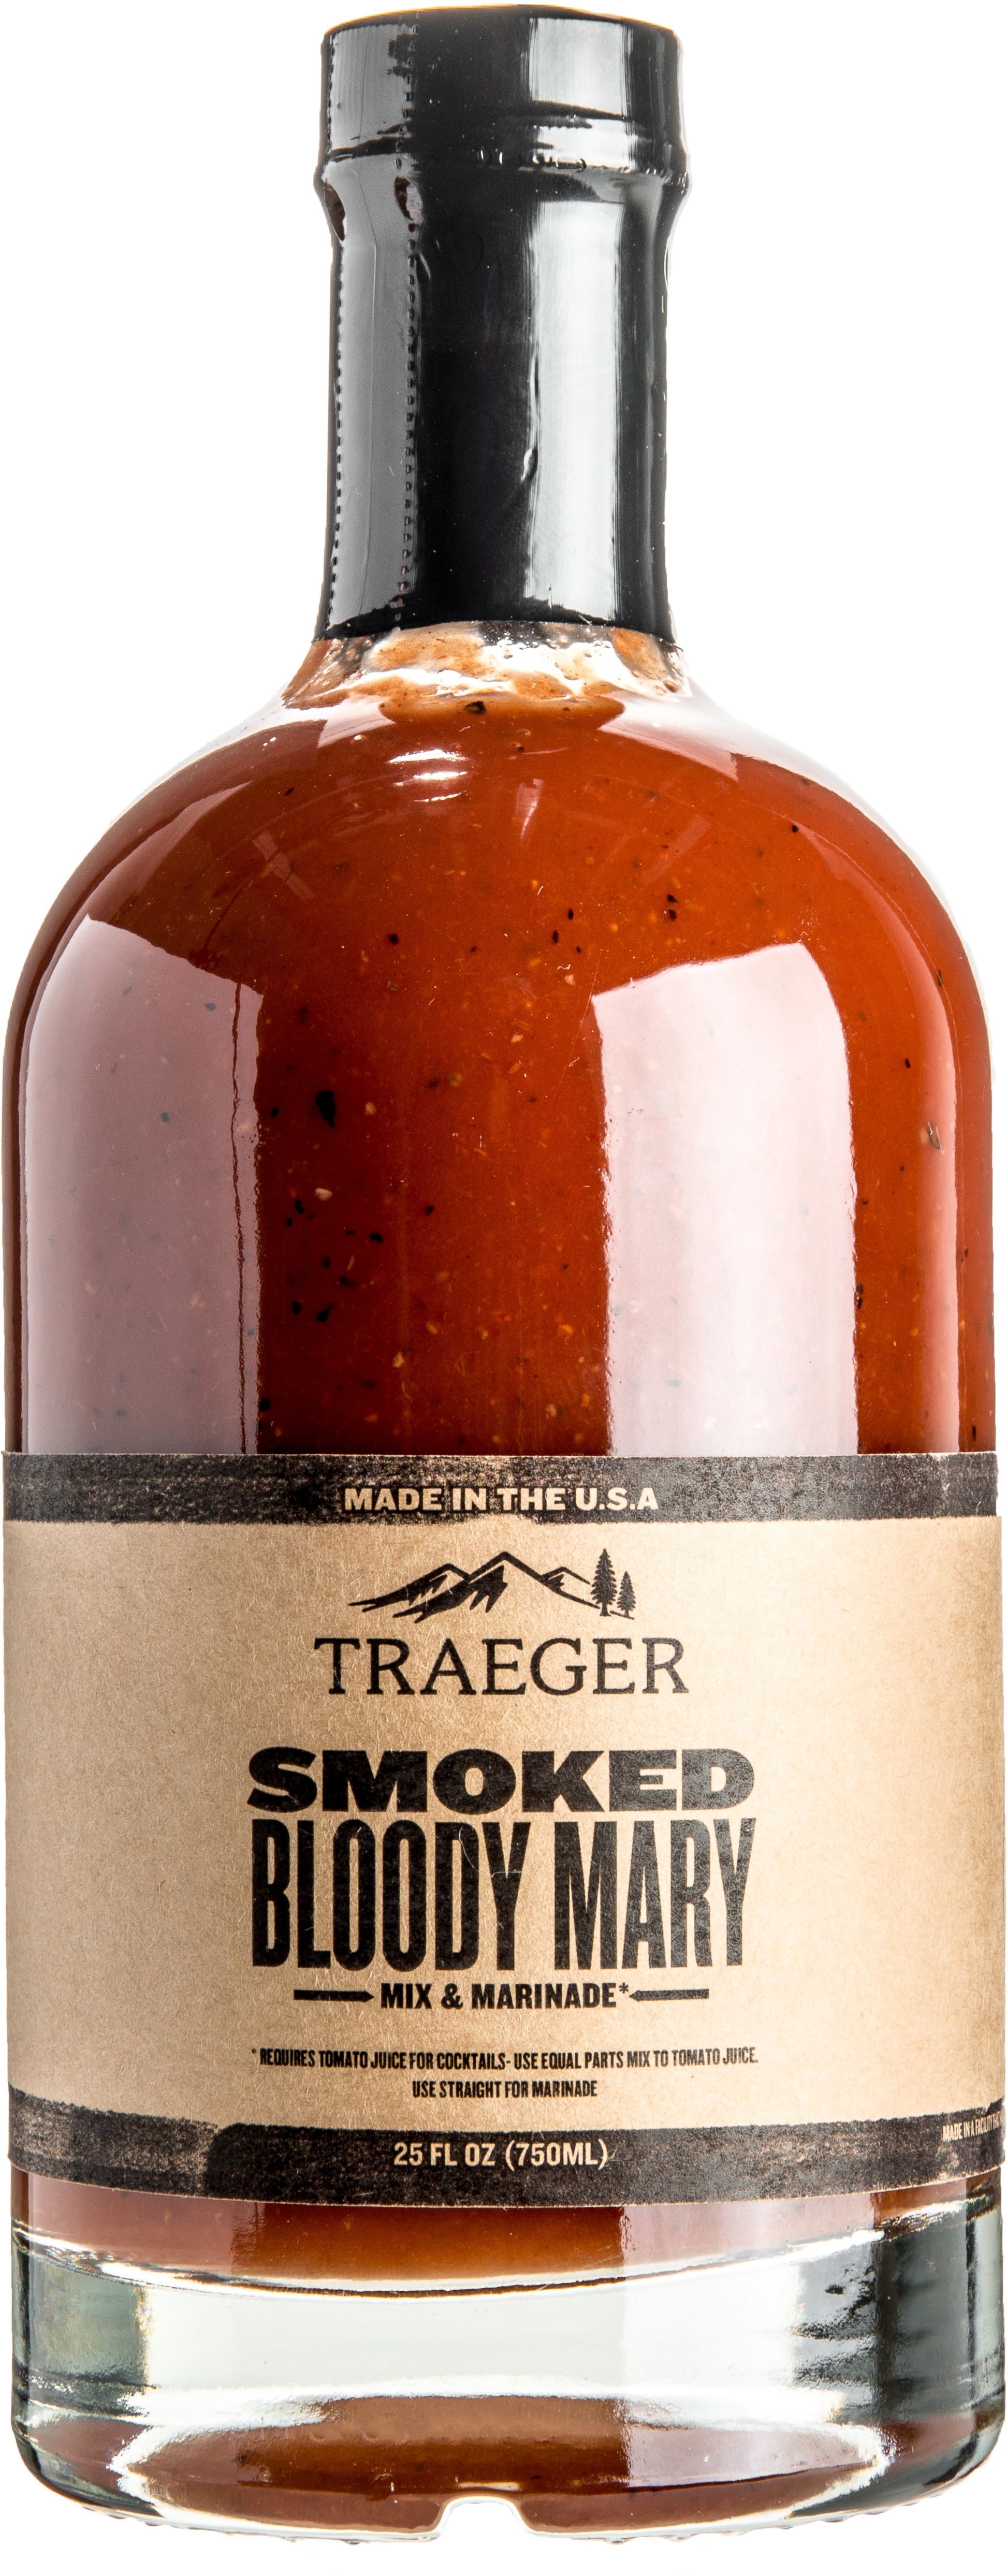 Traeger Smoked Bloody Mary Mix